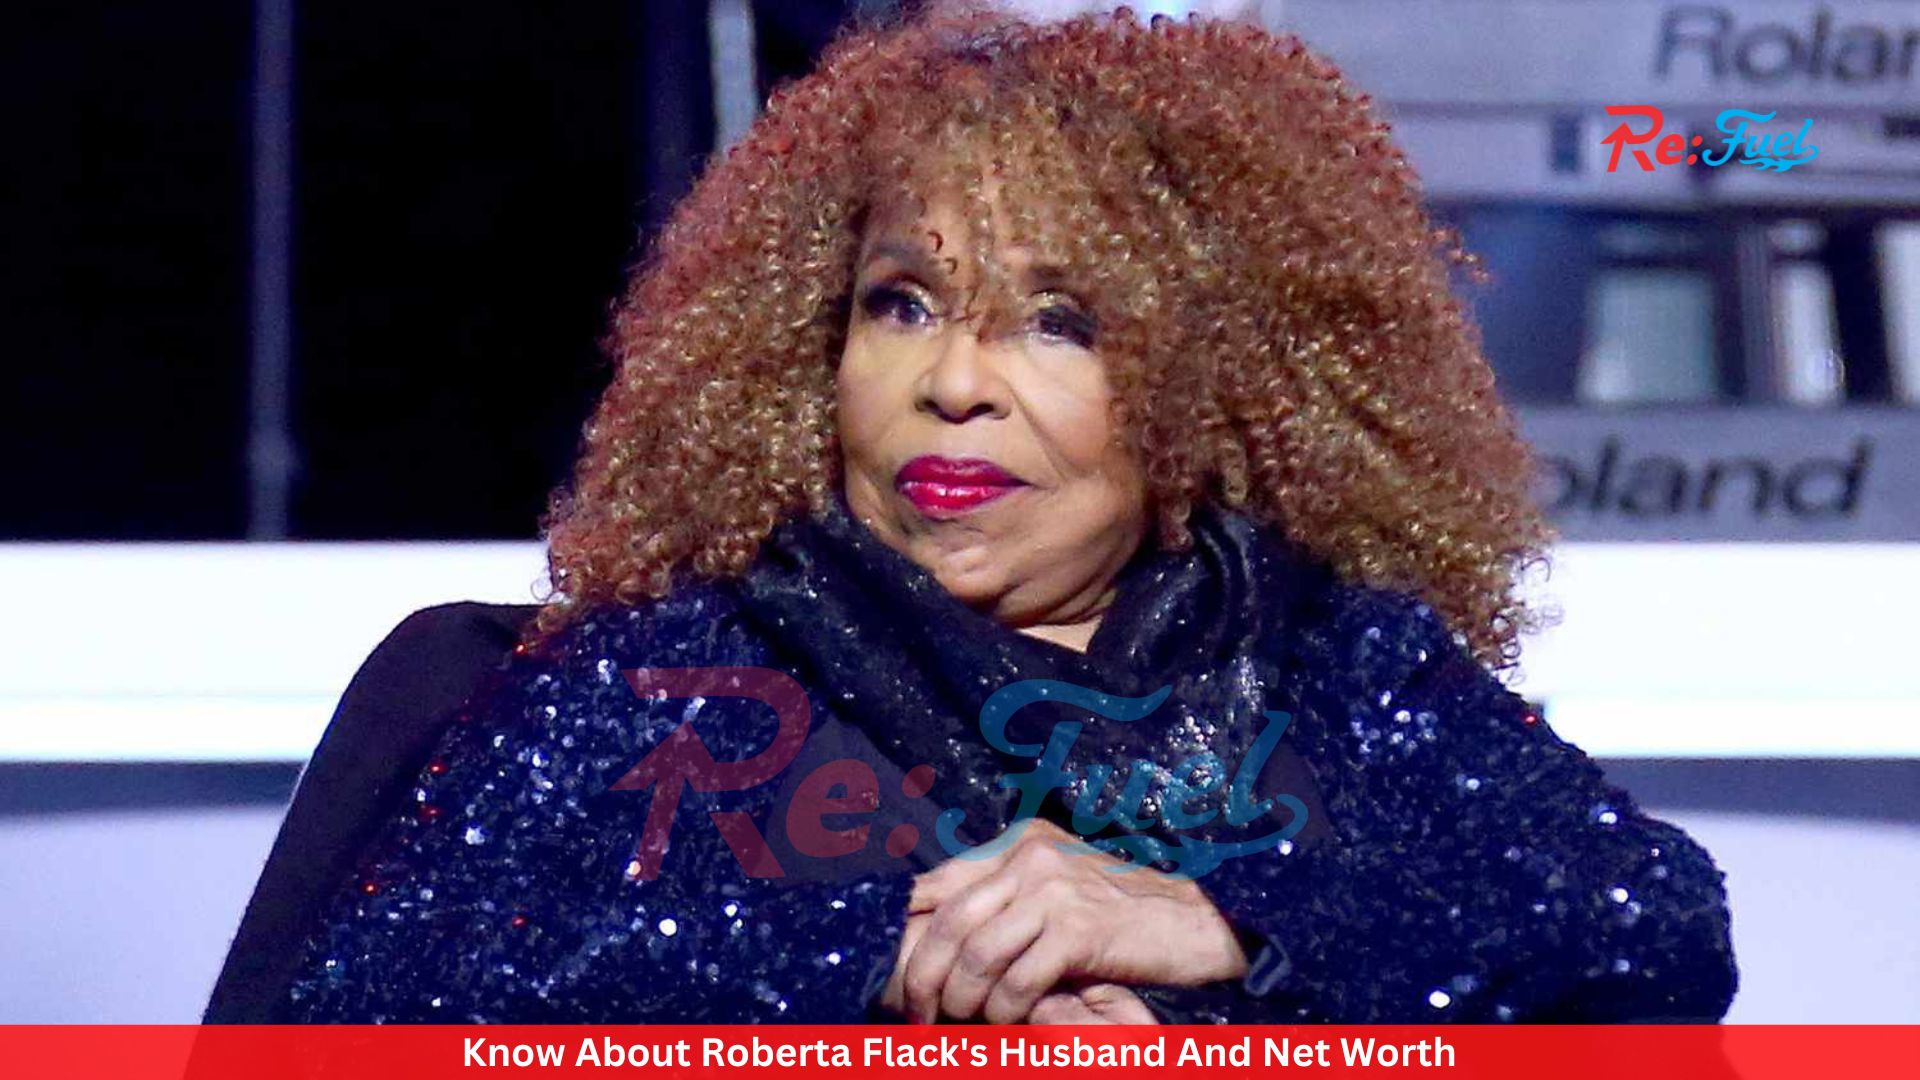 Know About Roberta Flack's Husband And Net Worth